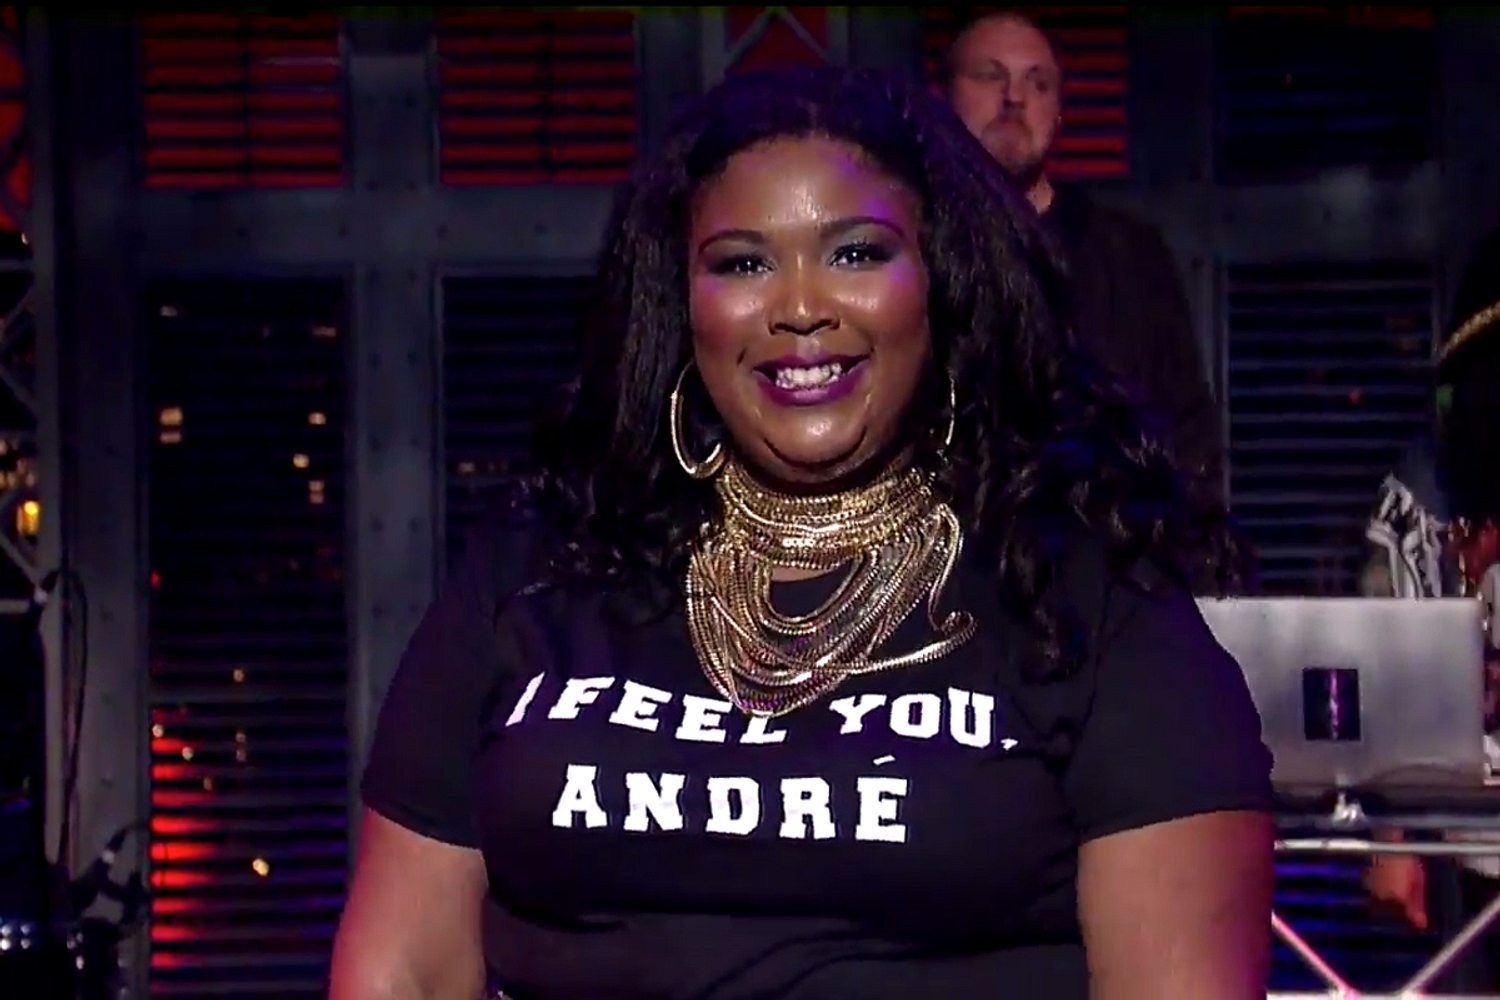 Watch Lizzo bring ‘Bus Passes and Happy Meals’ to Letterman